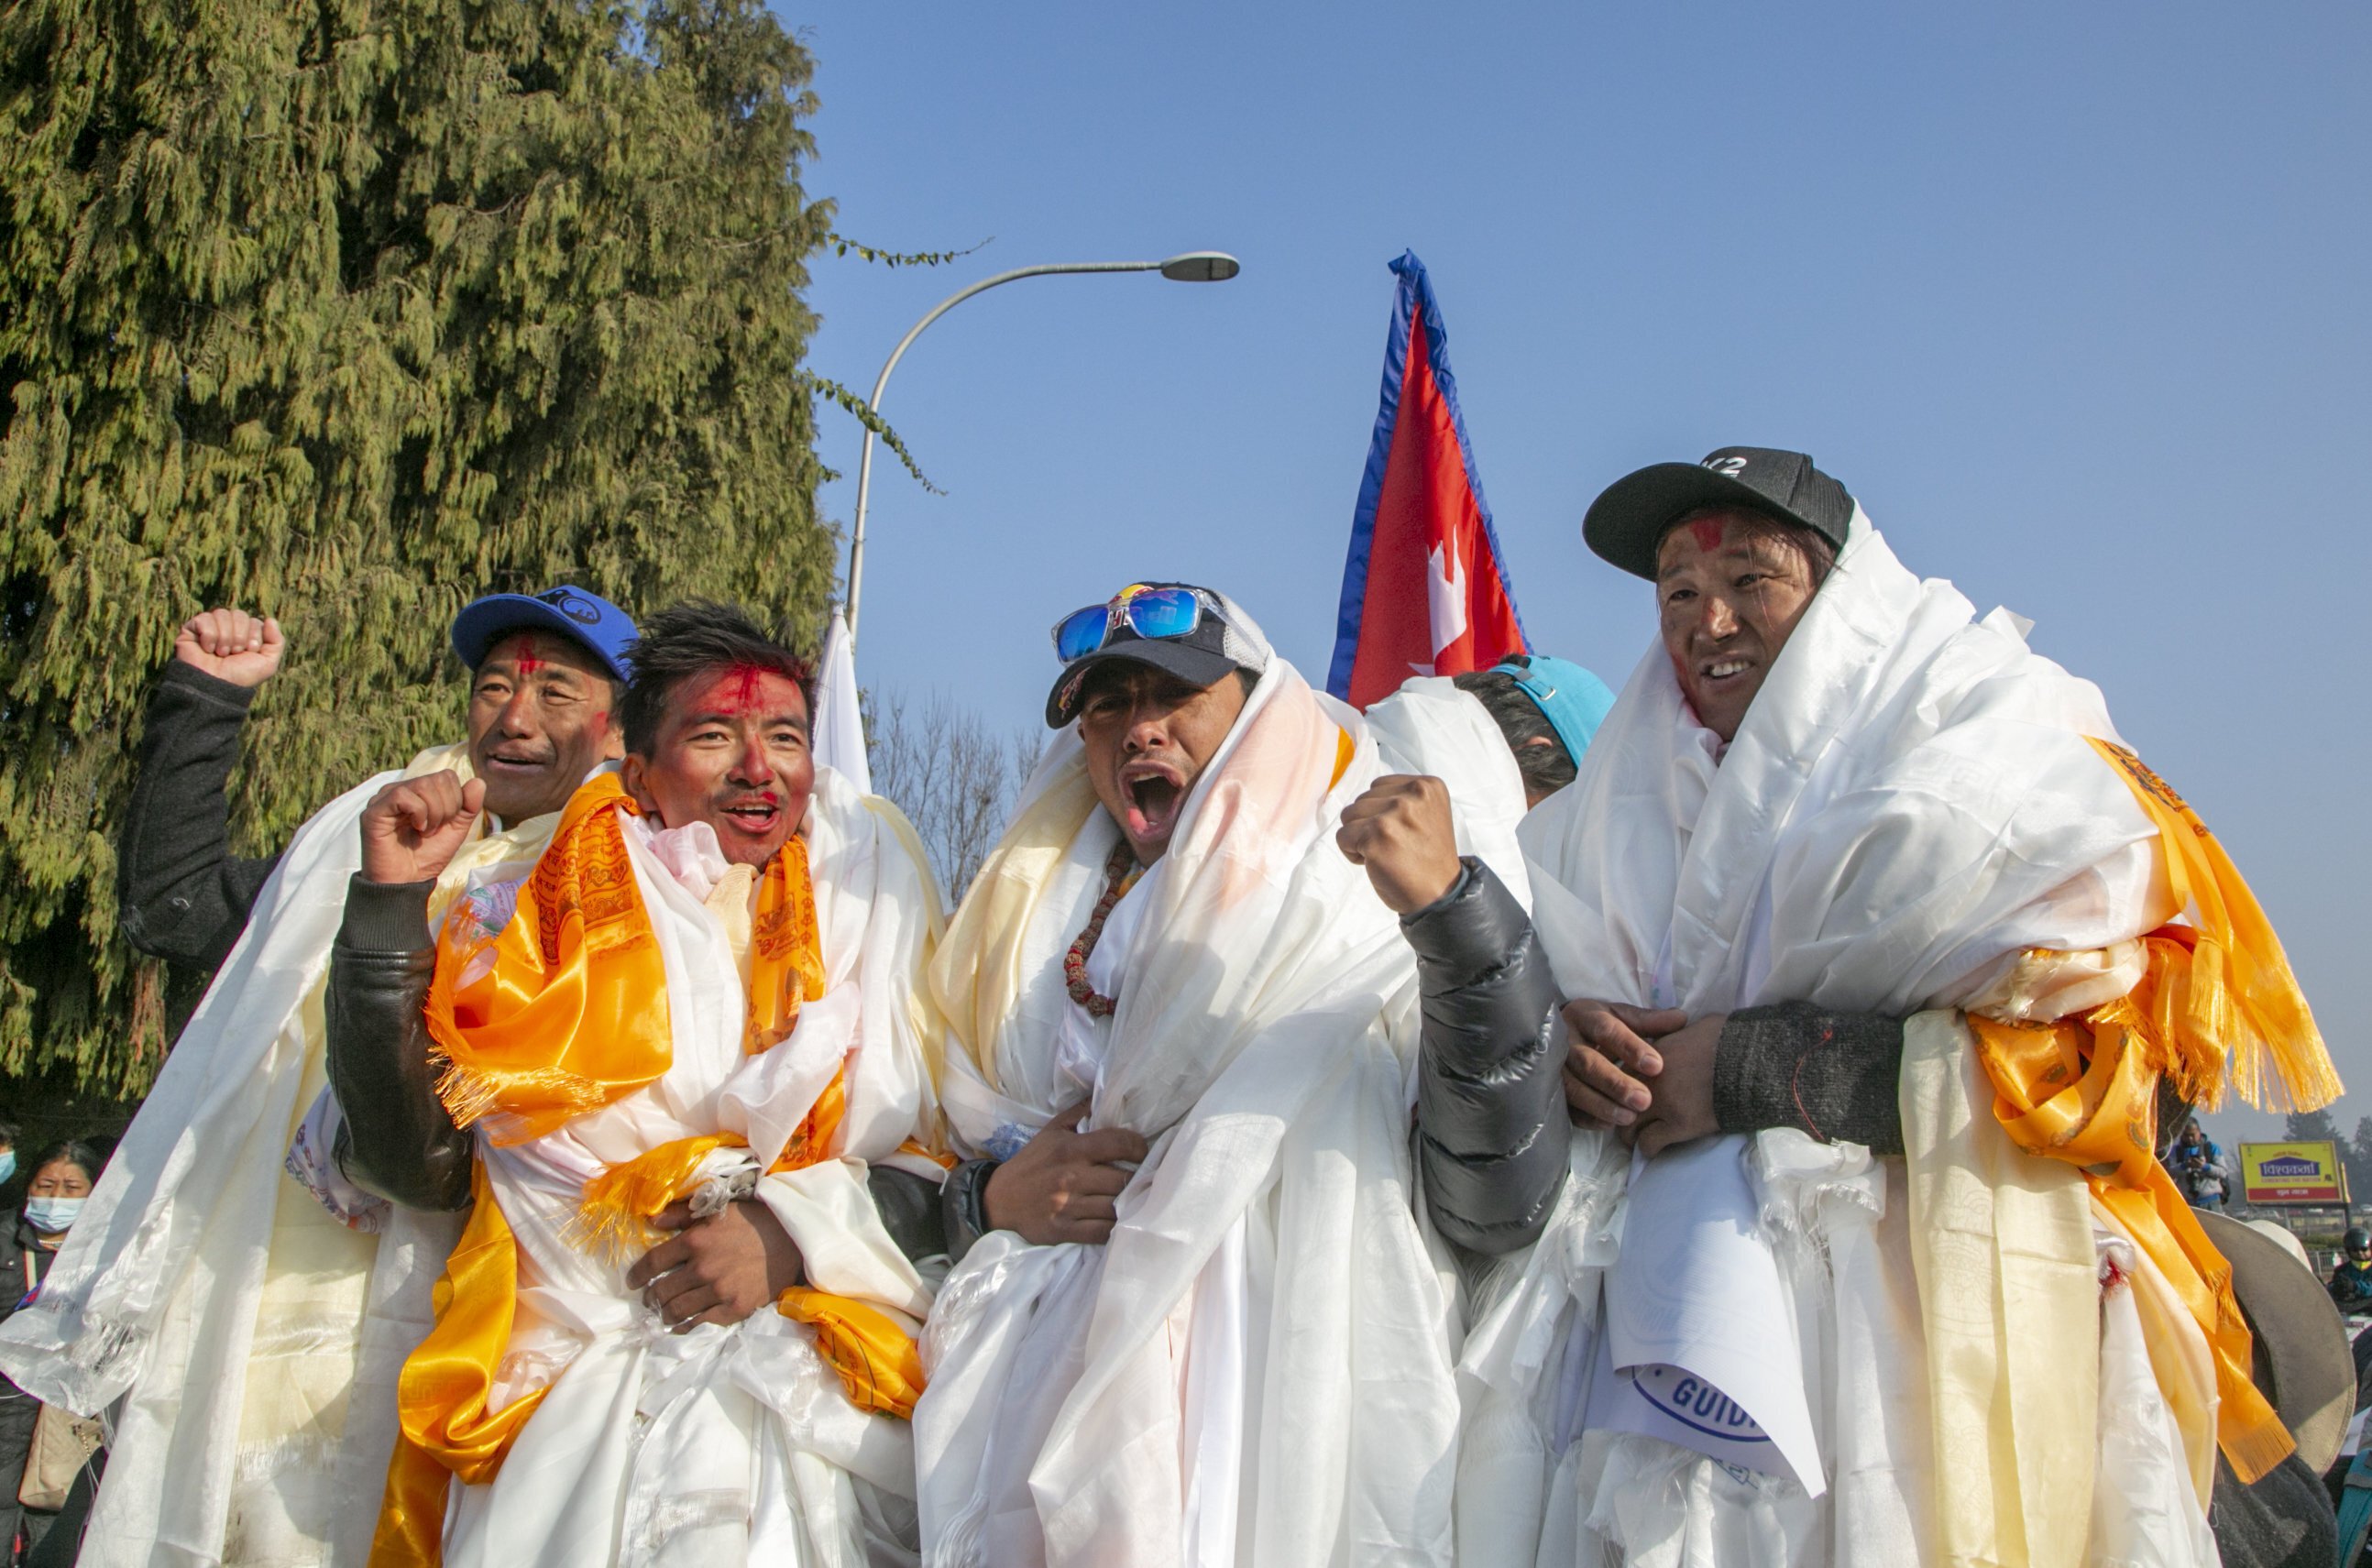 Nepalese team that climbed K2 receives hero’s welcome back home